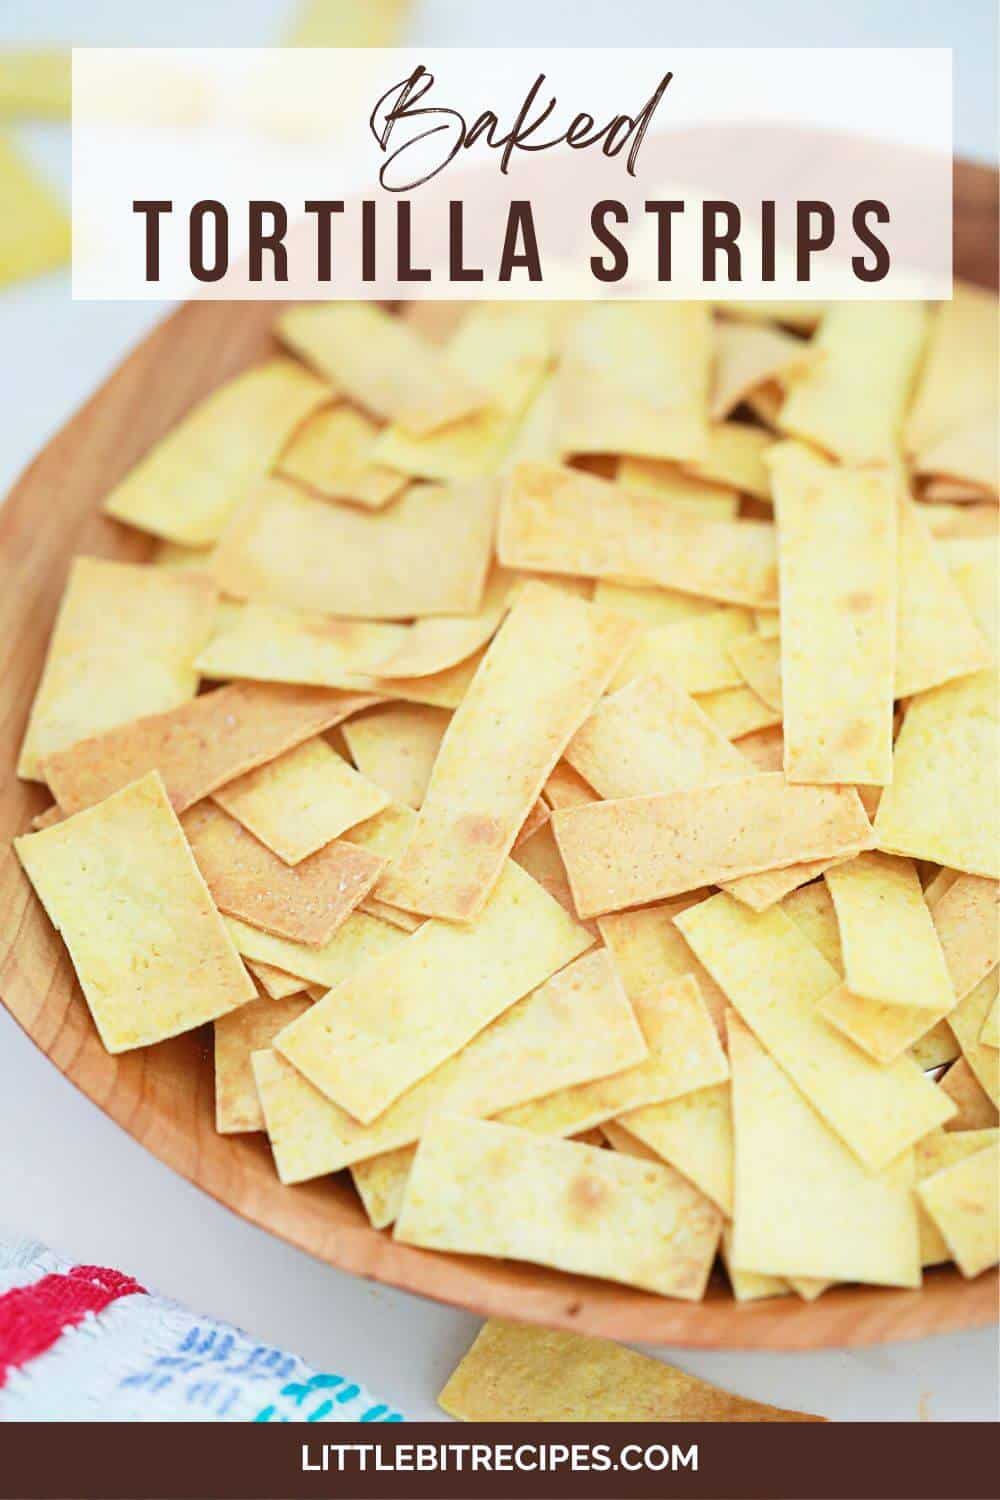 baked tortilla strips with text.